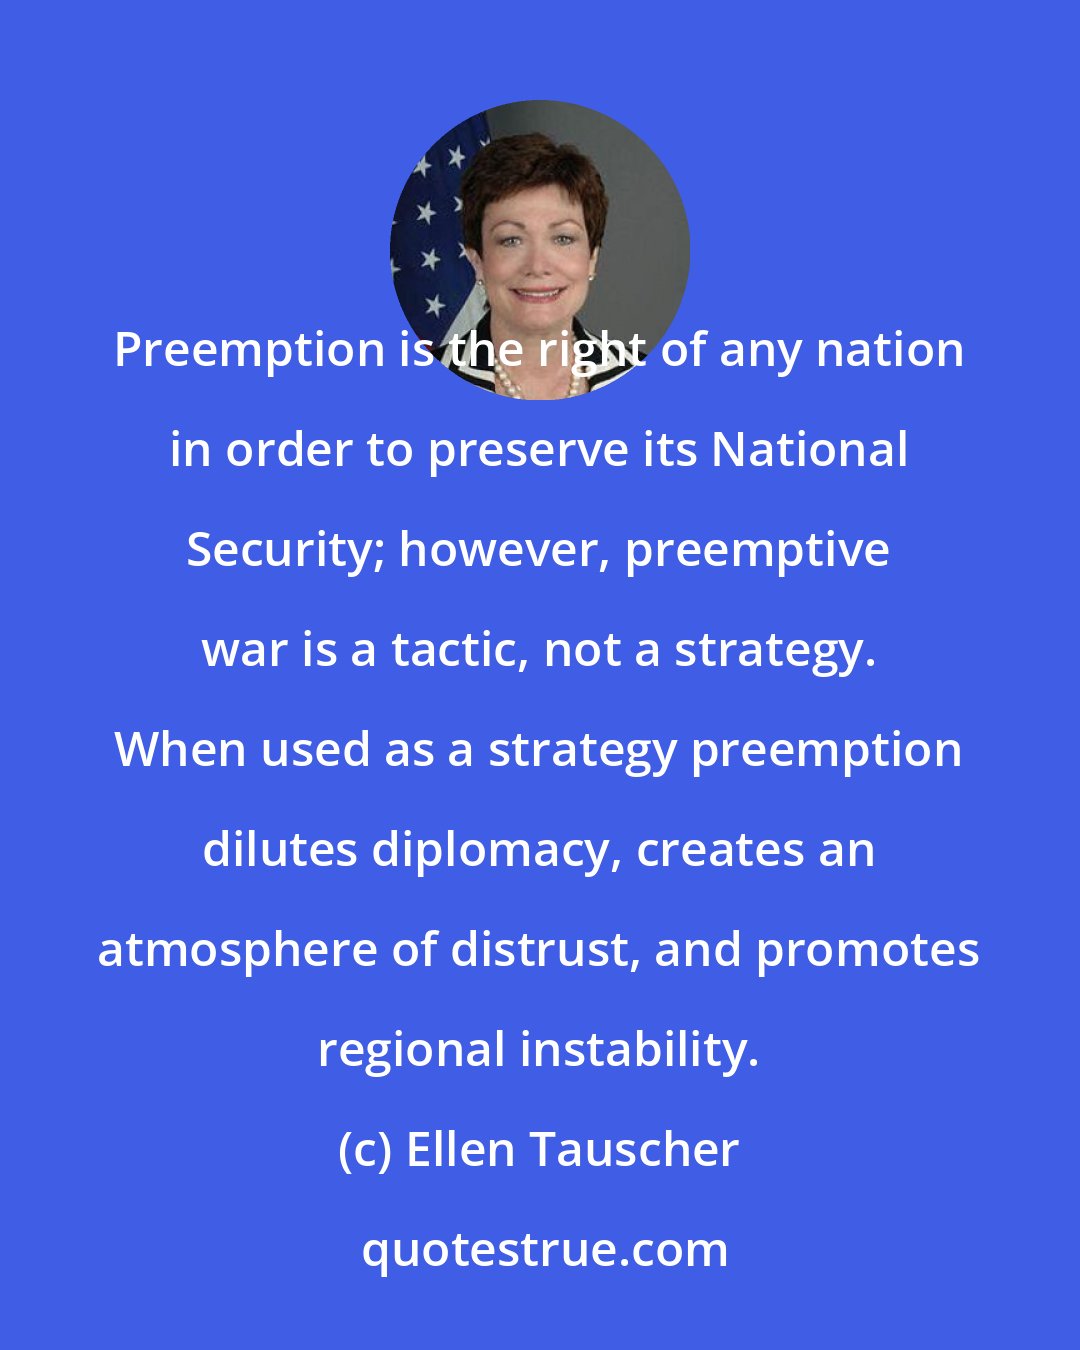 Ellen Tauscher: Preemption is the right of any nation in order to preserve its National Security; however, preemptive war is a tactic, not a strategy. When used as a strategy preemption dilutes diplomacy, creates an atmosphere of distrust, and promotes regional instability.